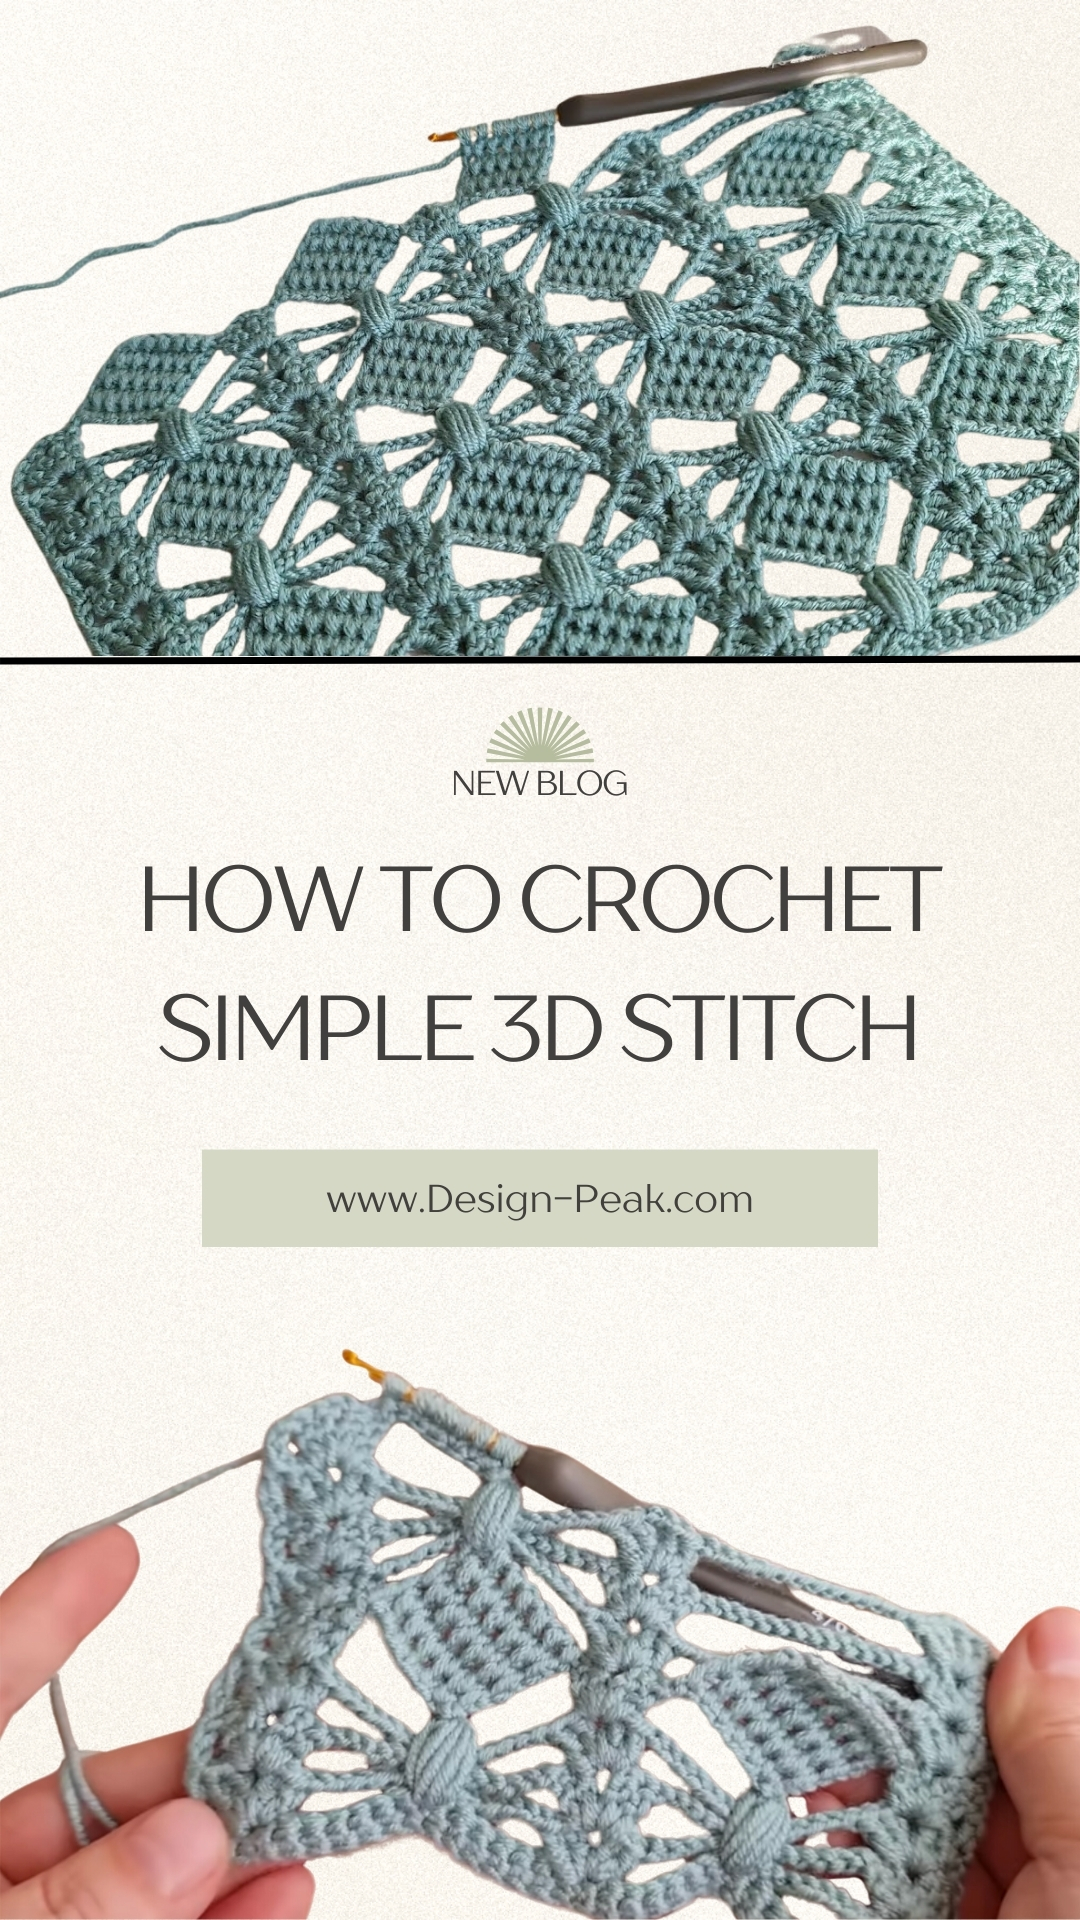 How to Crochet Simple 3D Stitch